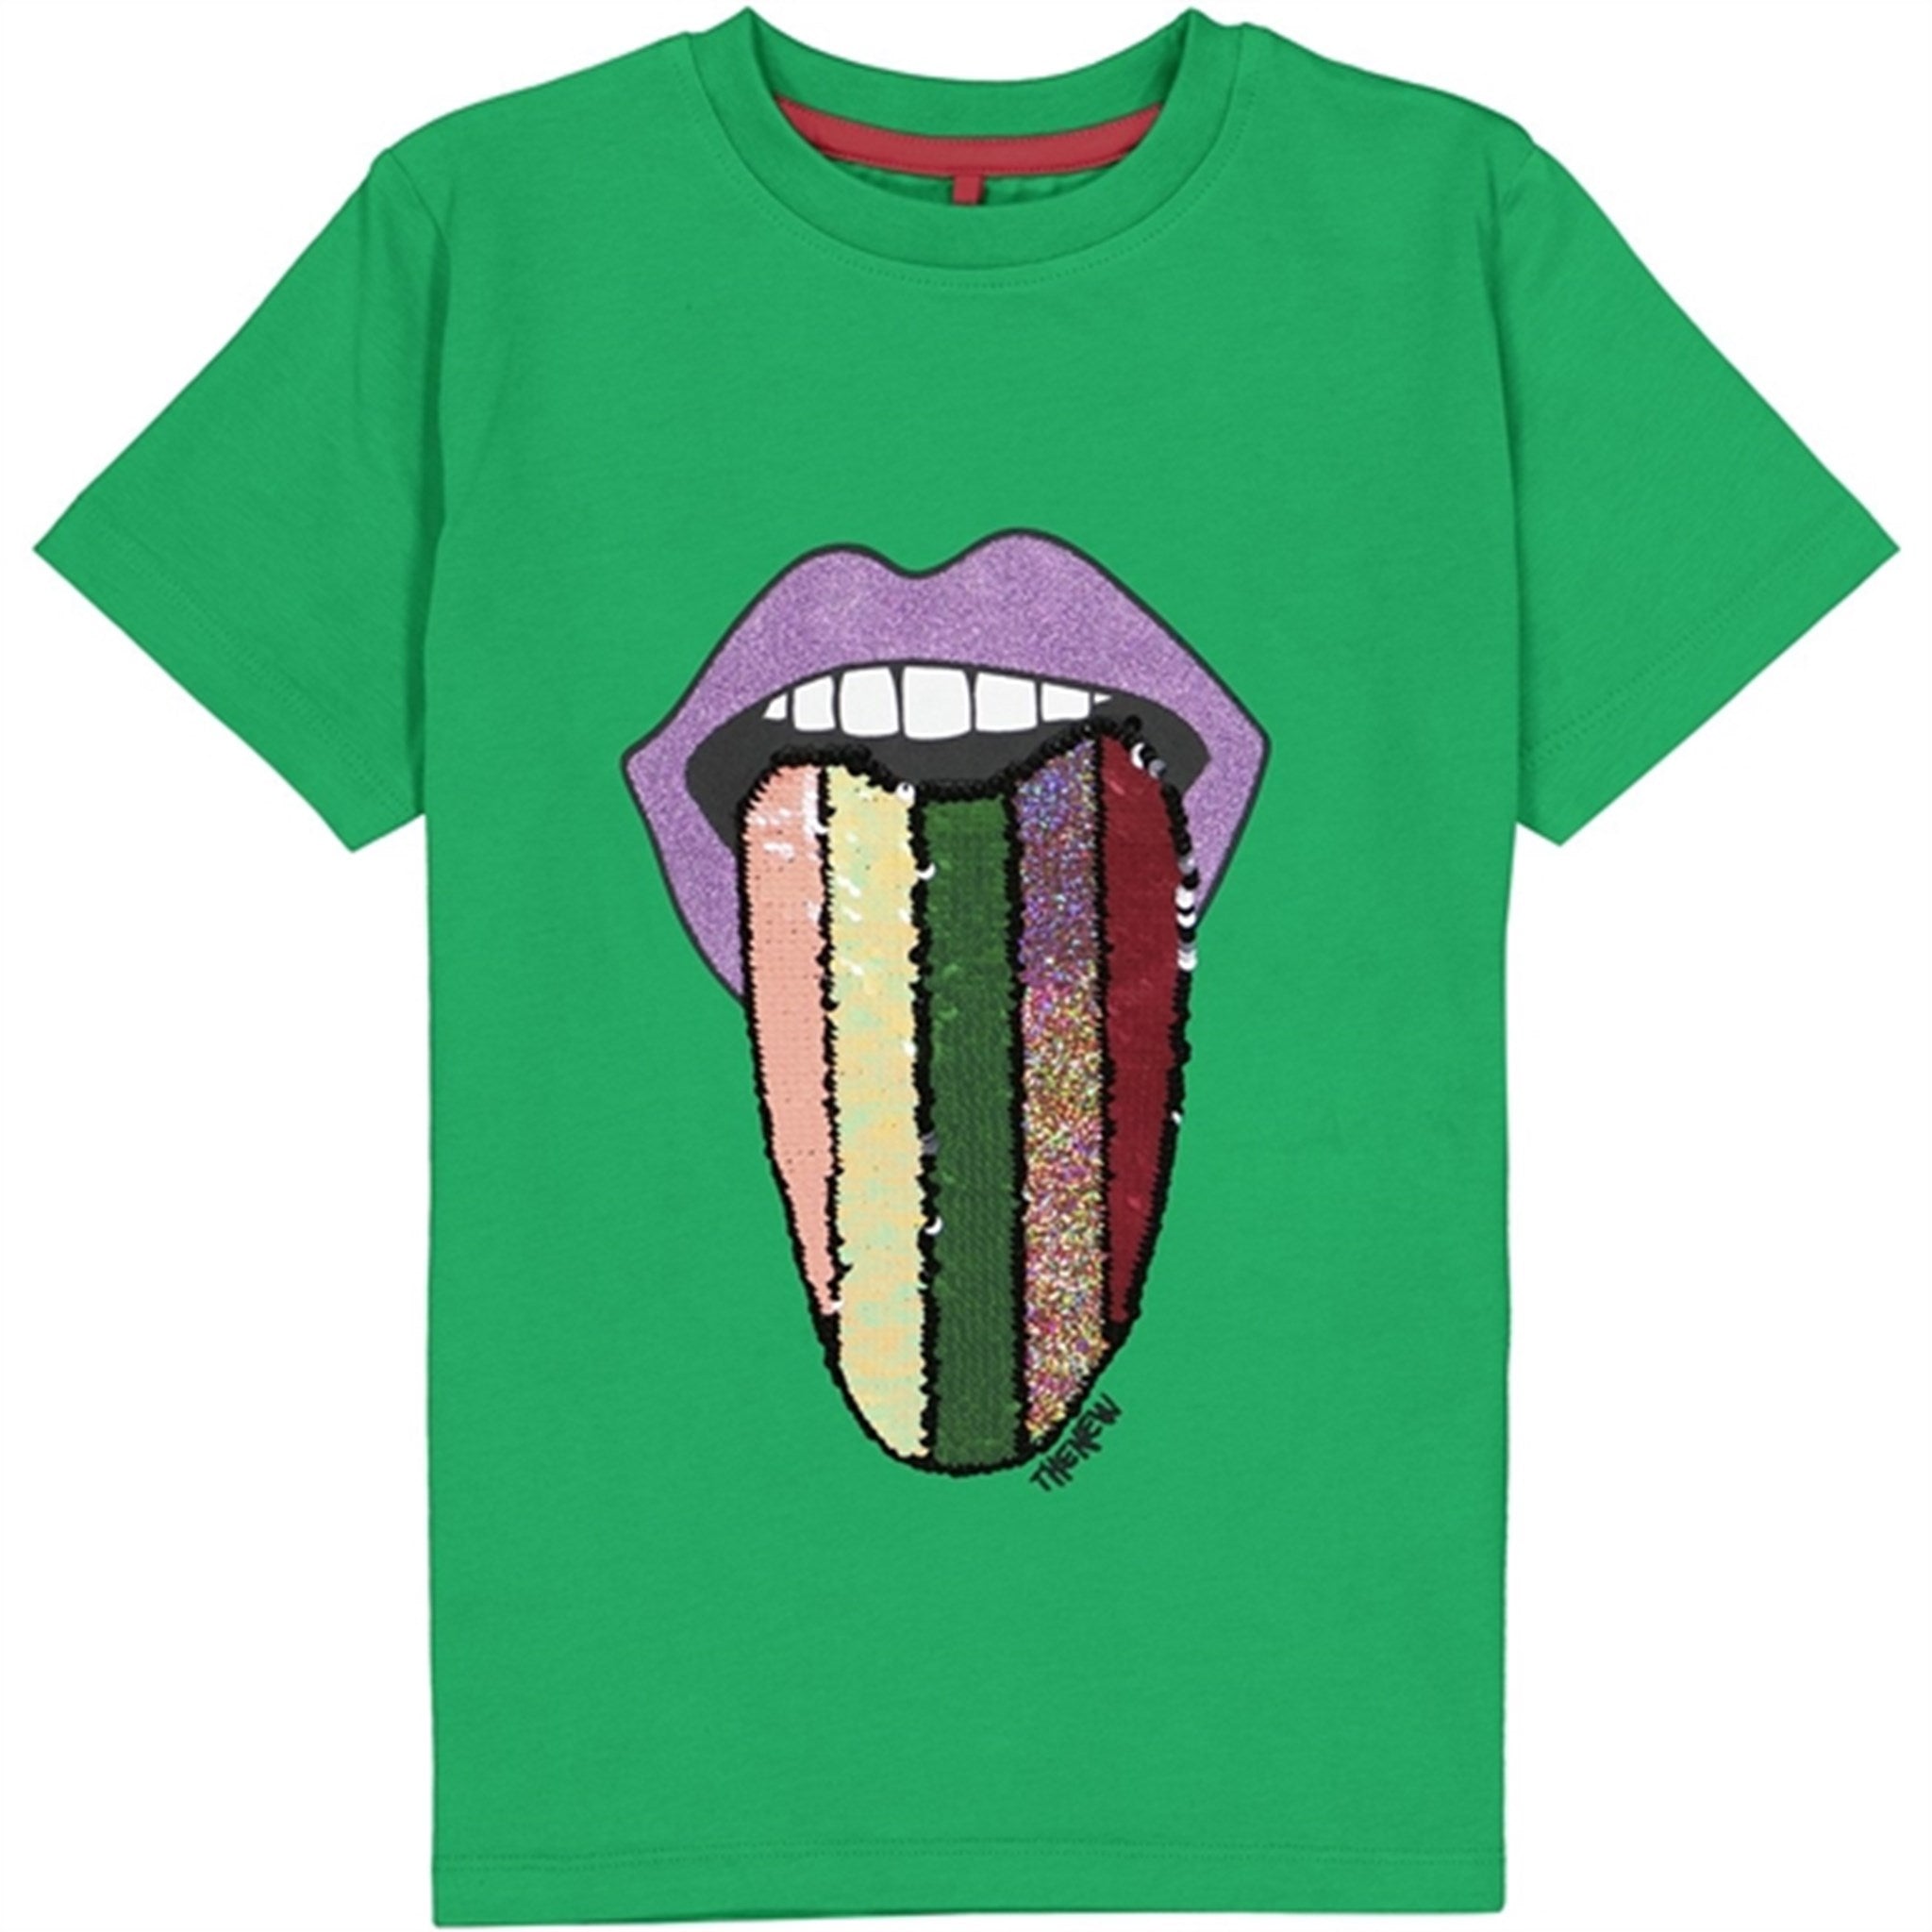 The New Bright Green Jennabell T-shirt